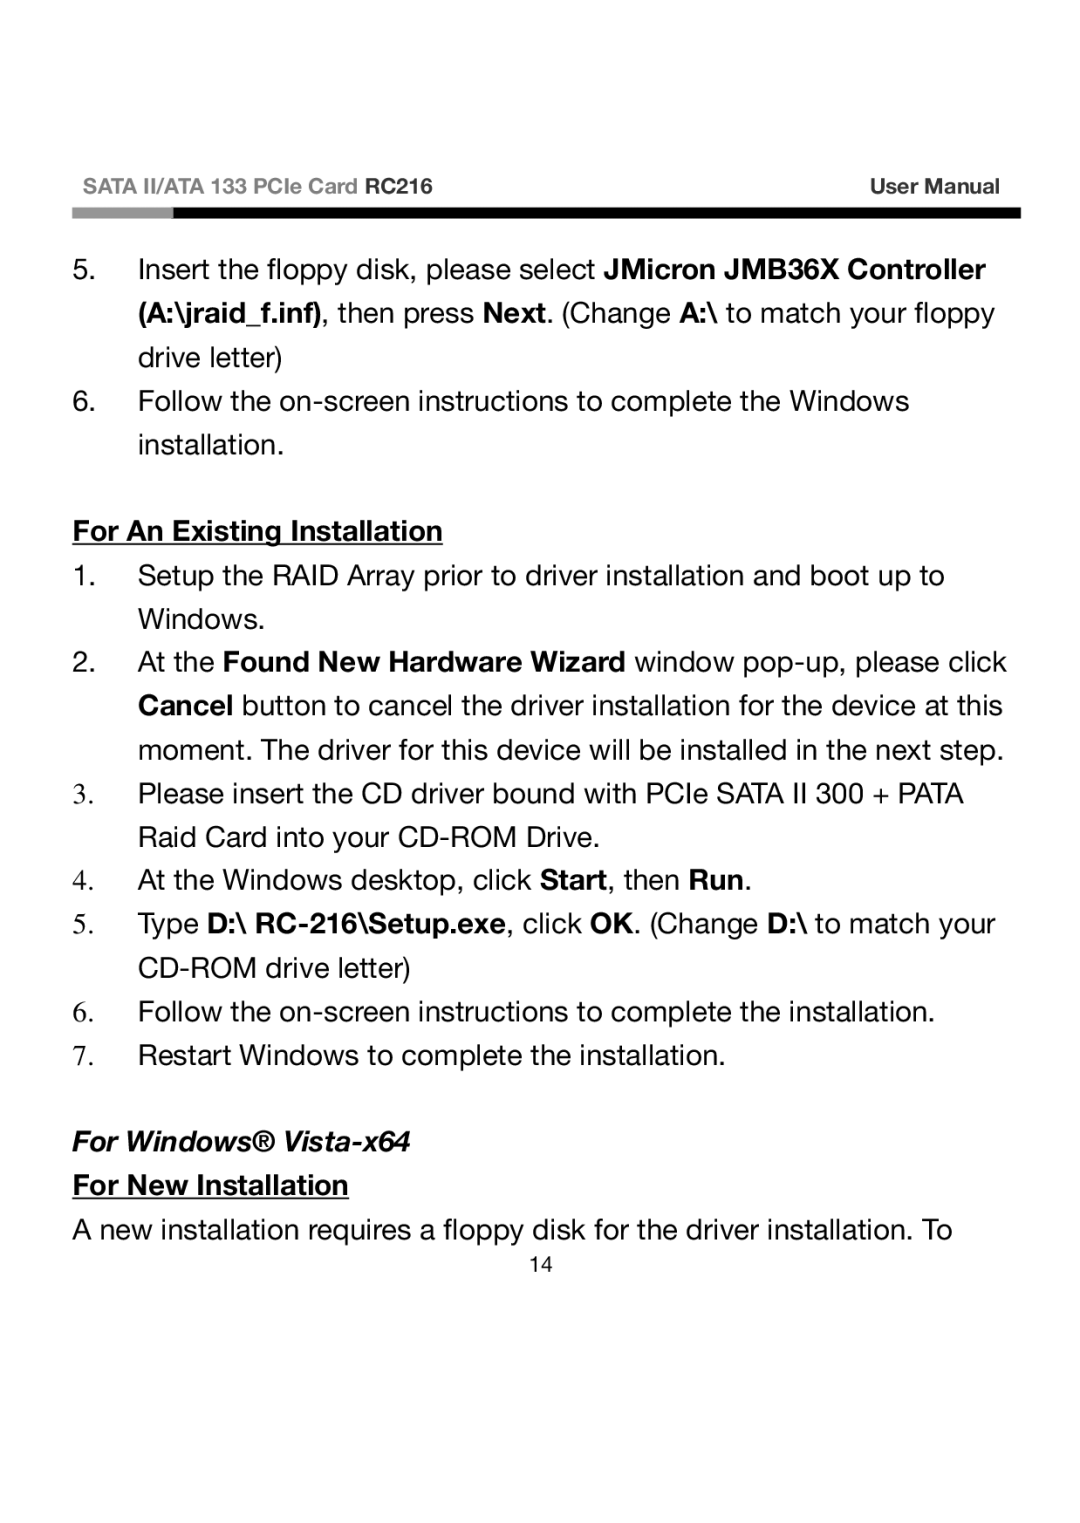 Rosewill RC216 user manual For Windows Vista-x64 